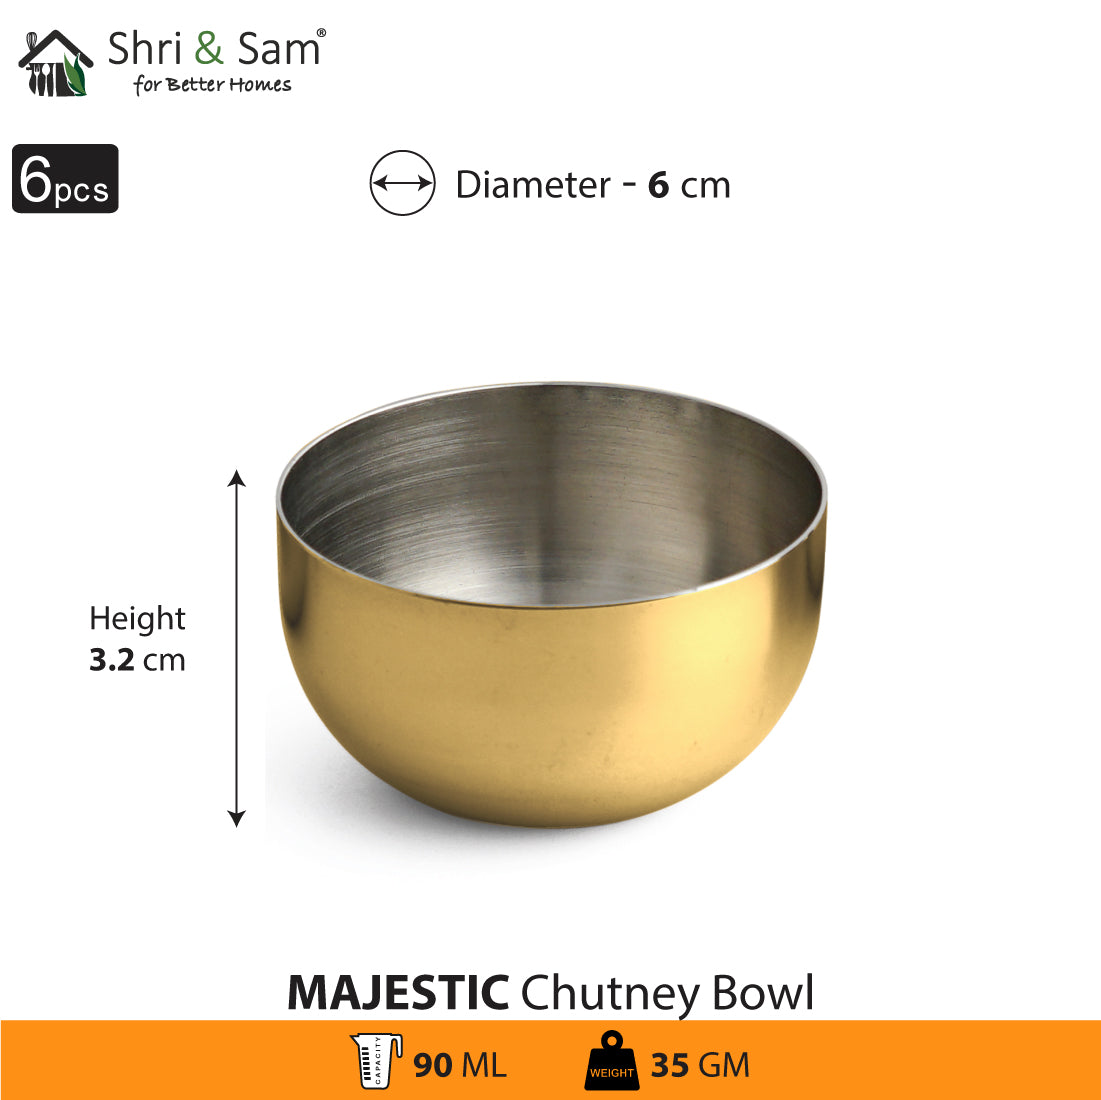 Stainless Steel 6 PCS Chutney Bowl with Gold PVD Coating Majestic